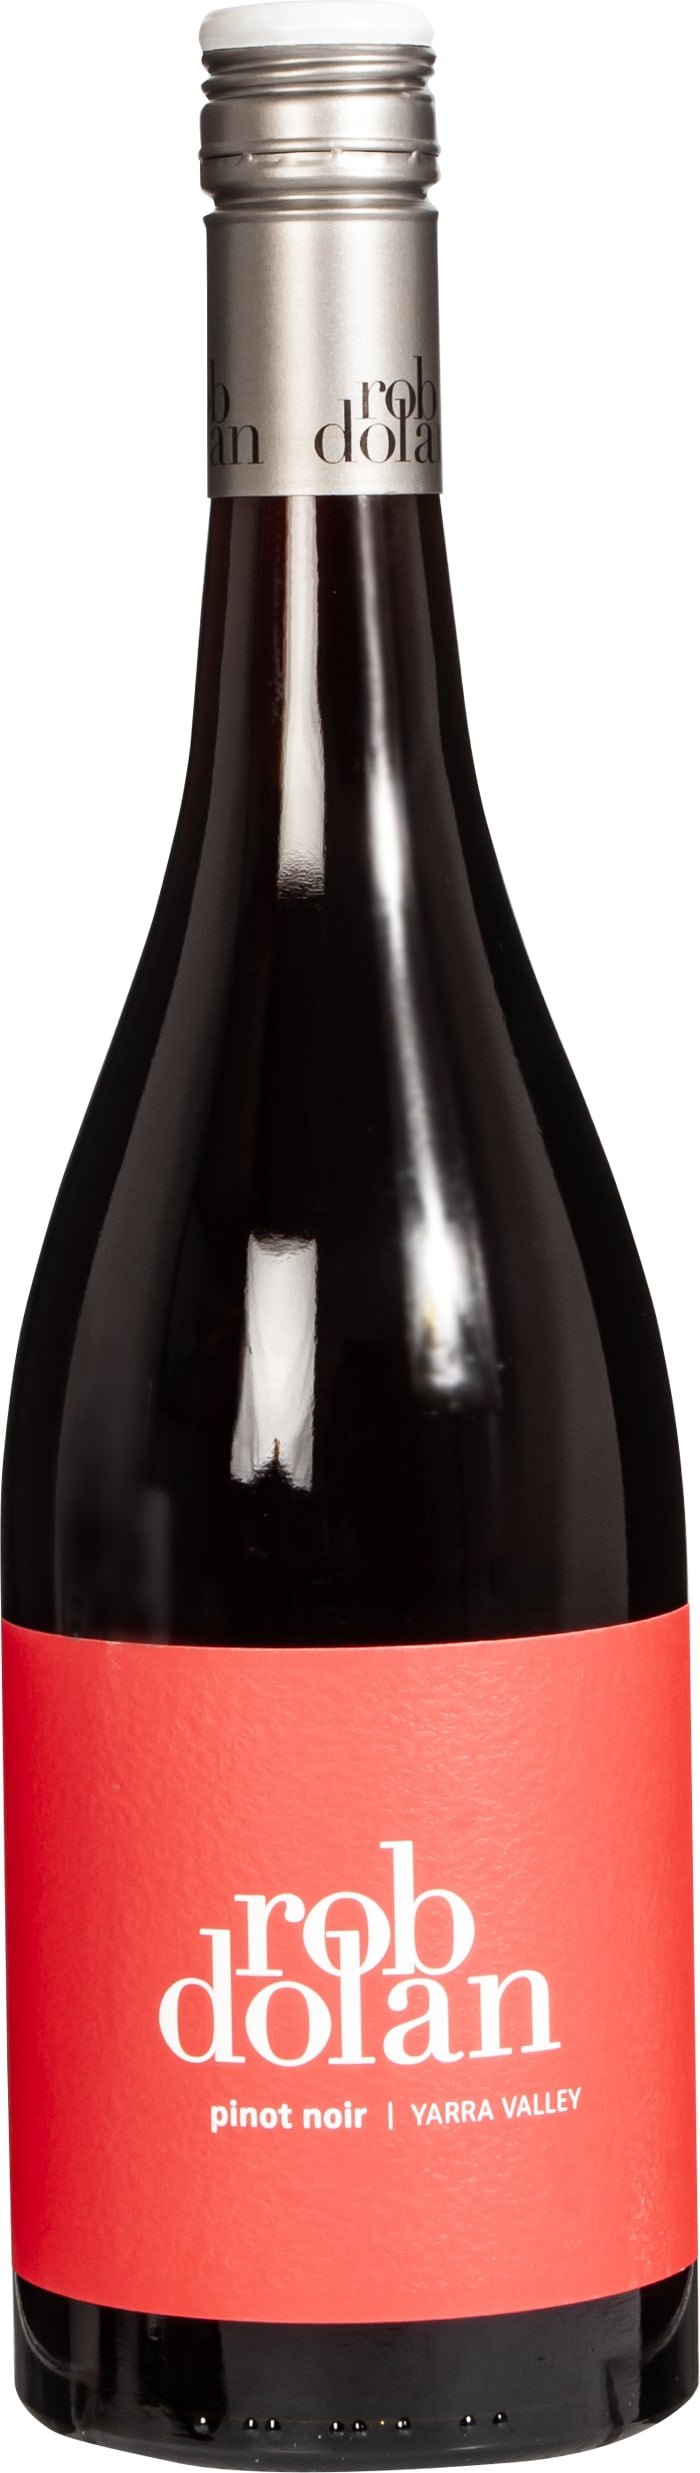 Rob Dolan Pinot Noir 2021 75cl - Buy Rob Dolan Wines from GREAT WINES DIRECT wine shop